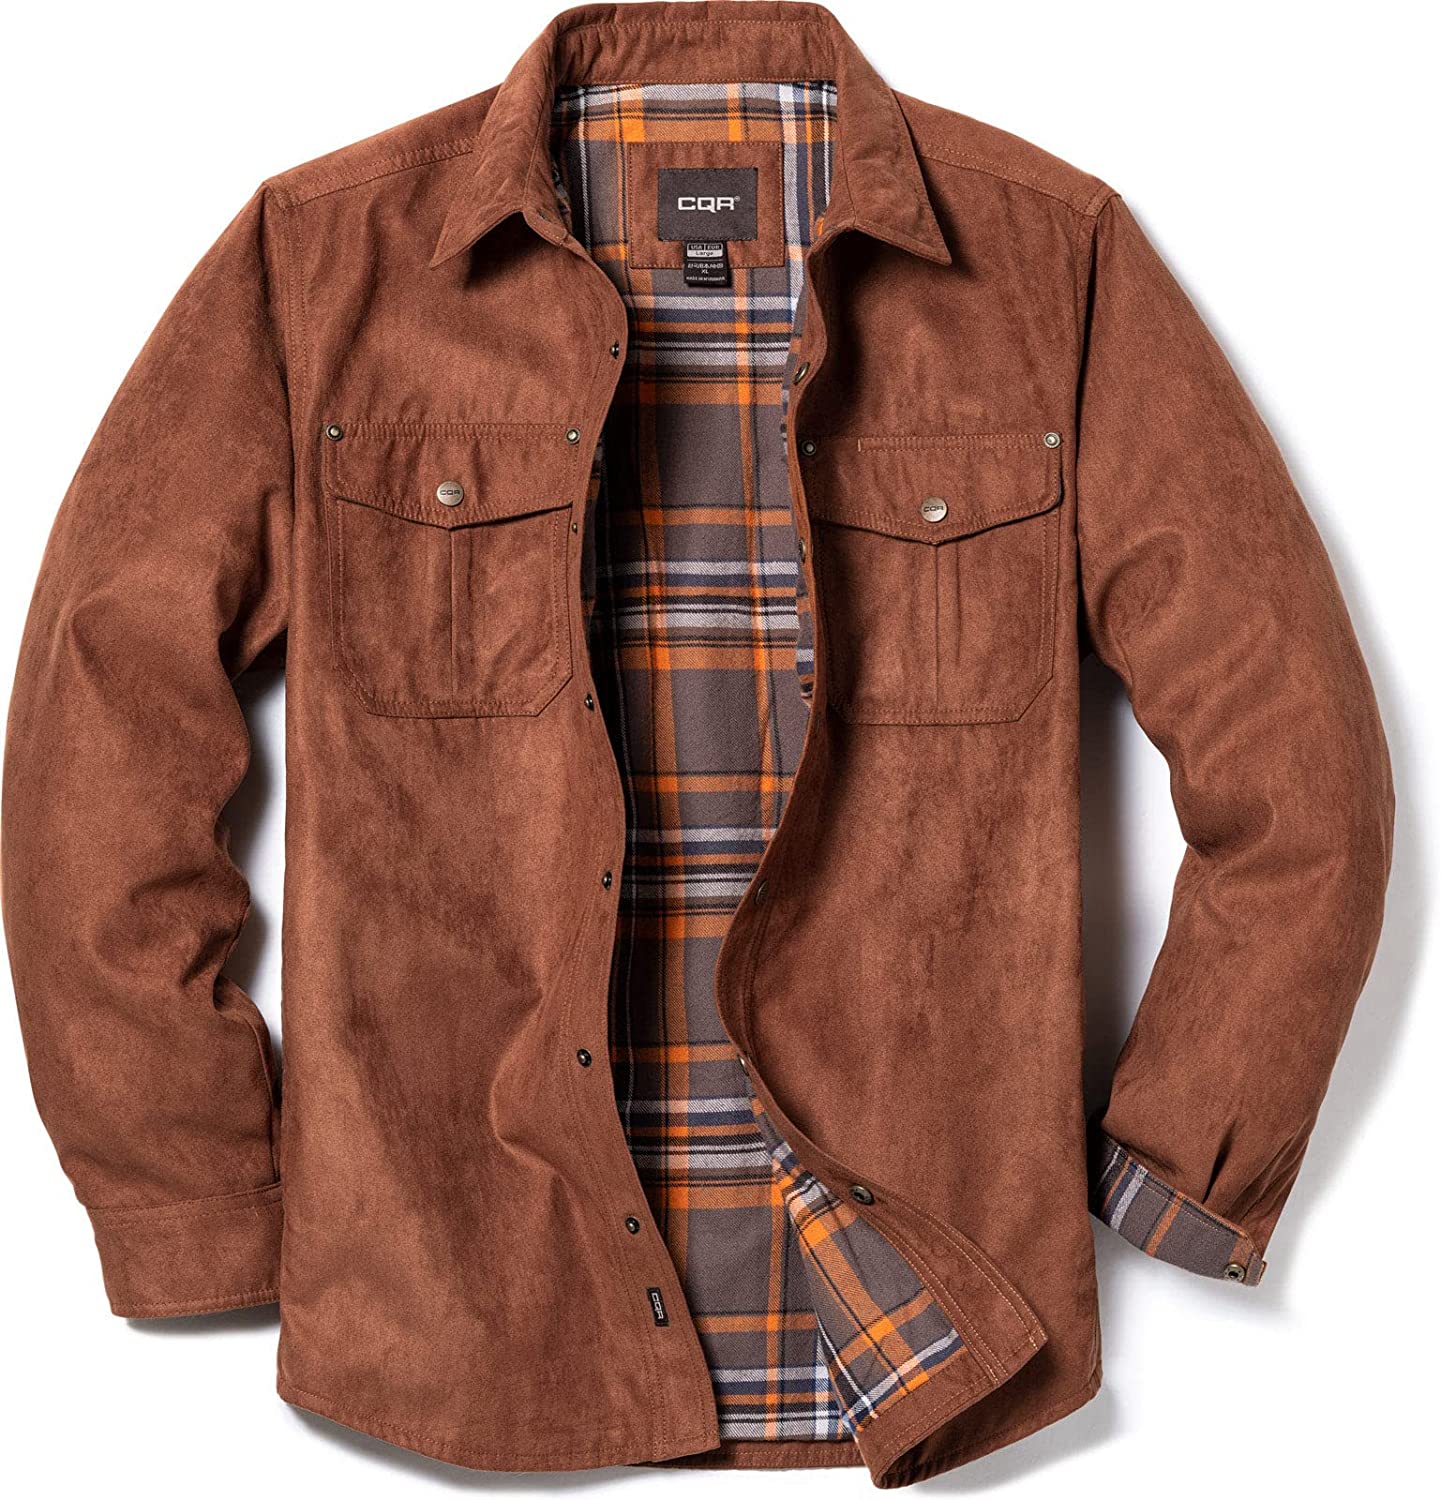 CQR Men's Flannel Lined Shirt Jackets Long Sleeved Rugged Plaid Cotton Brushed Suede Shirt Jacket 